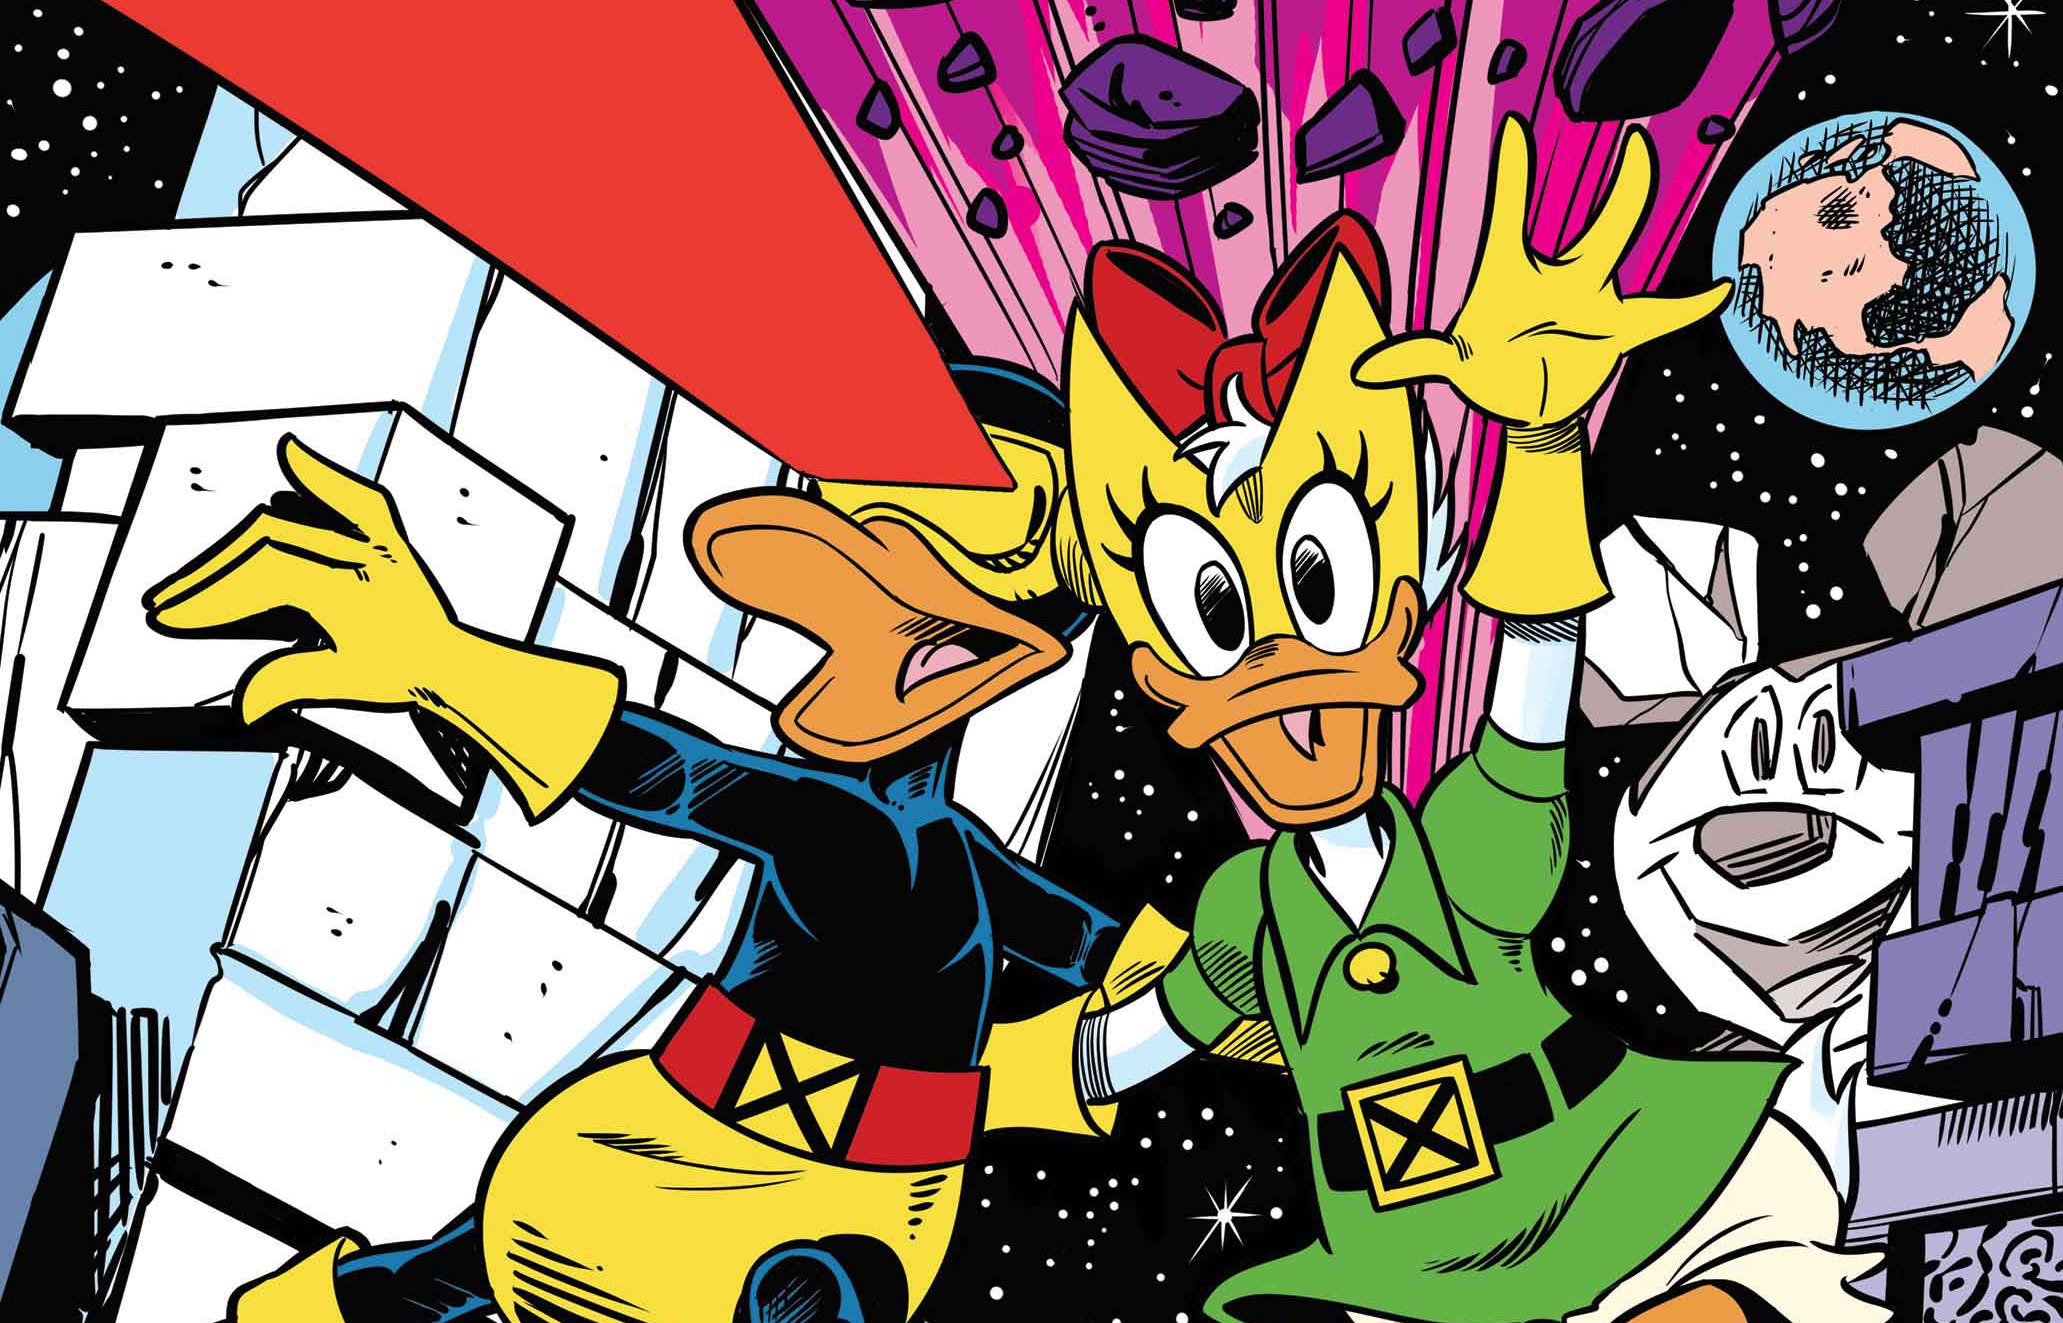 Marvel and Disney celebrate X-Men and Avengers with homage covers